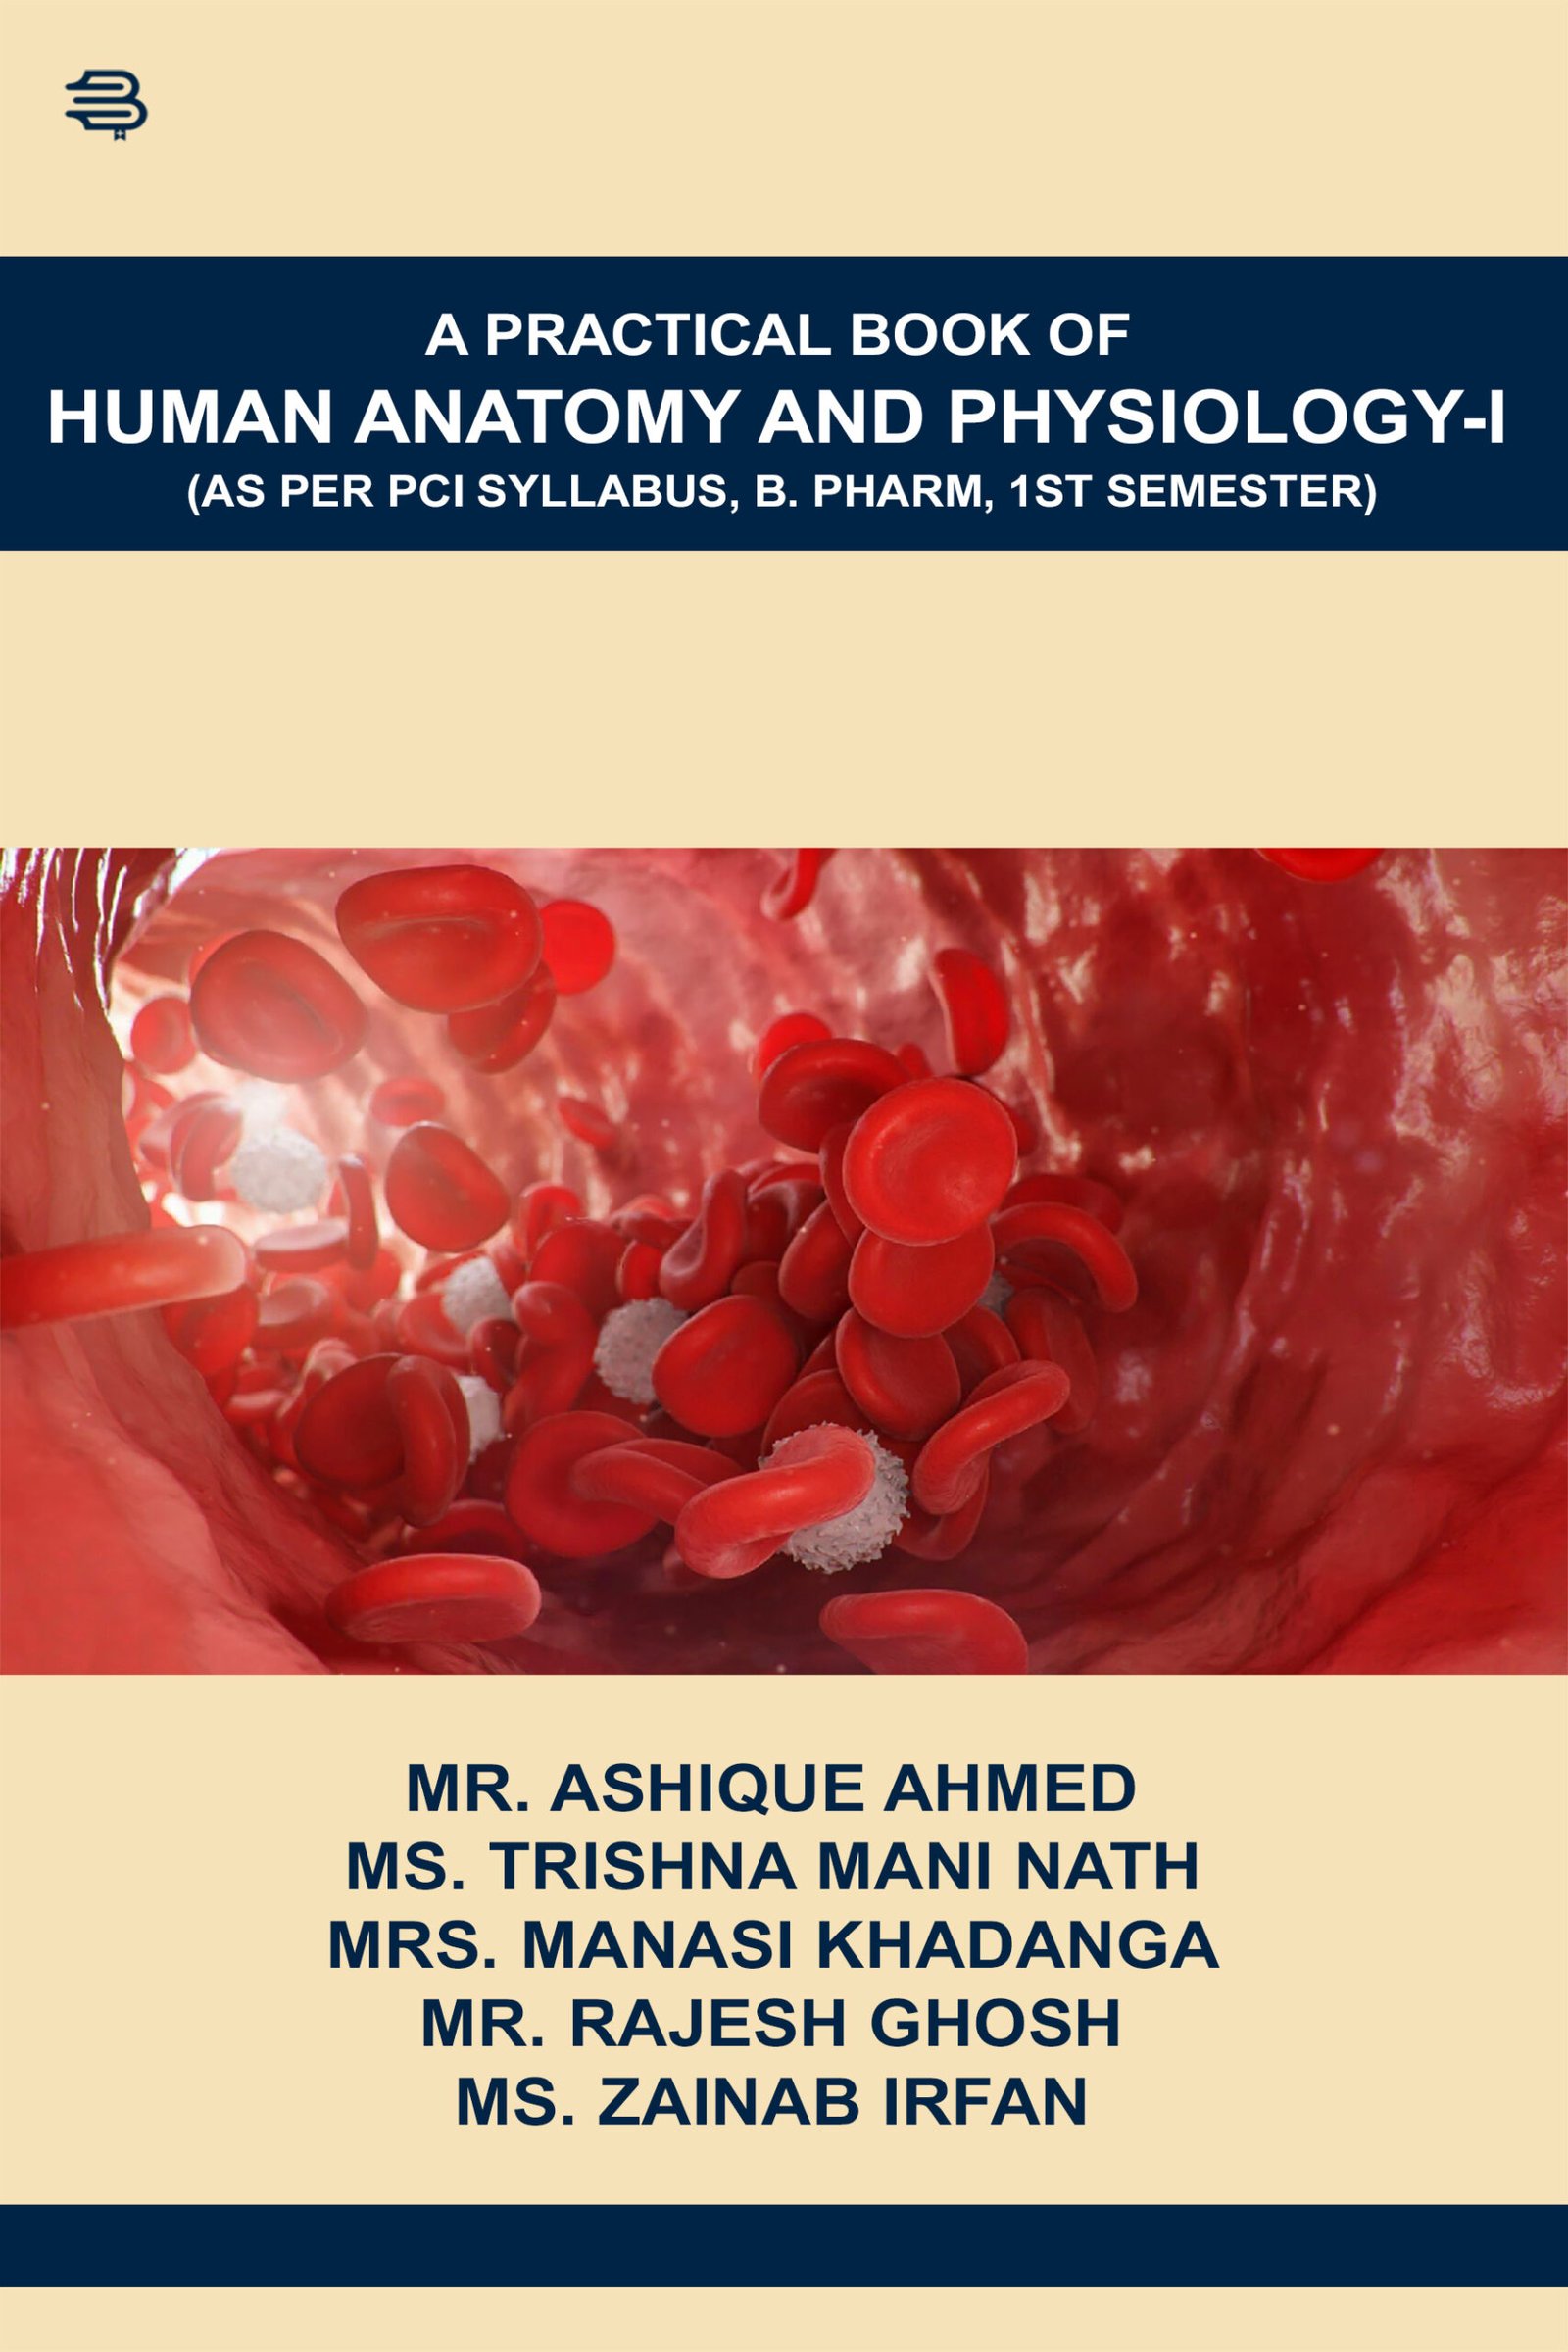 A PRACTICAL BOOK OF HUMAN ANATOMY AND PHYSIOLOGY-I, by (	Mr. Ashique Ahmed)